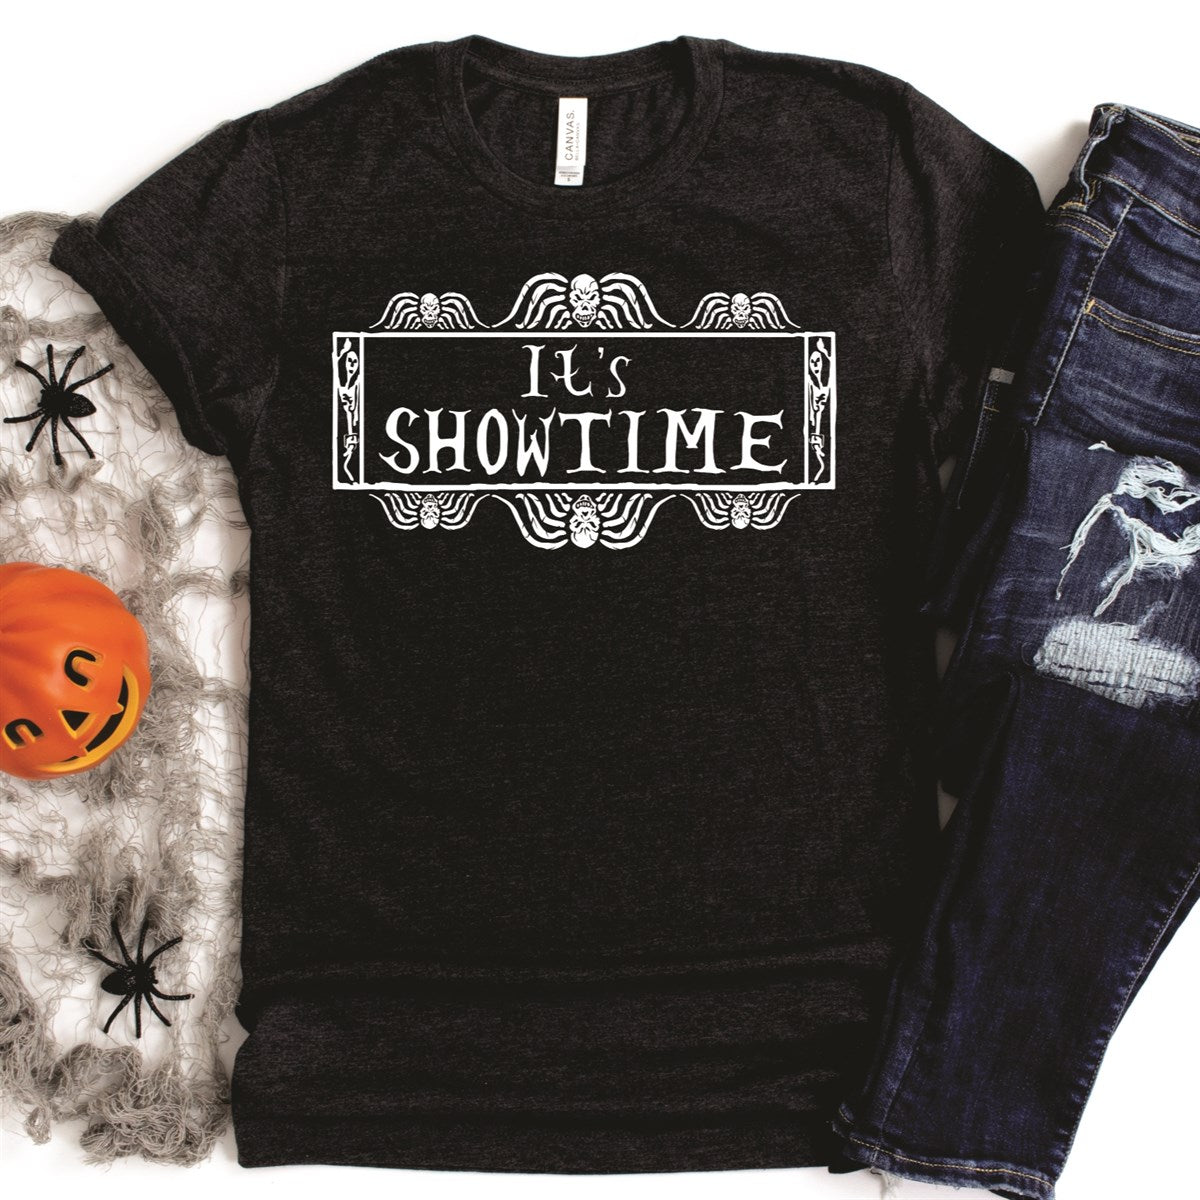 It's Showtime Tee